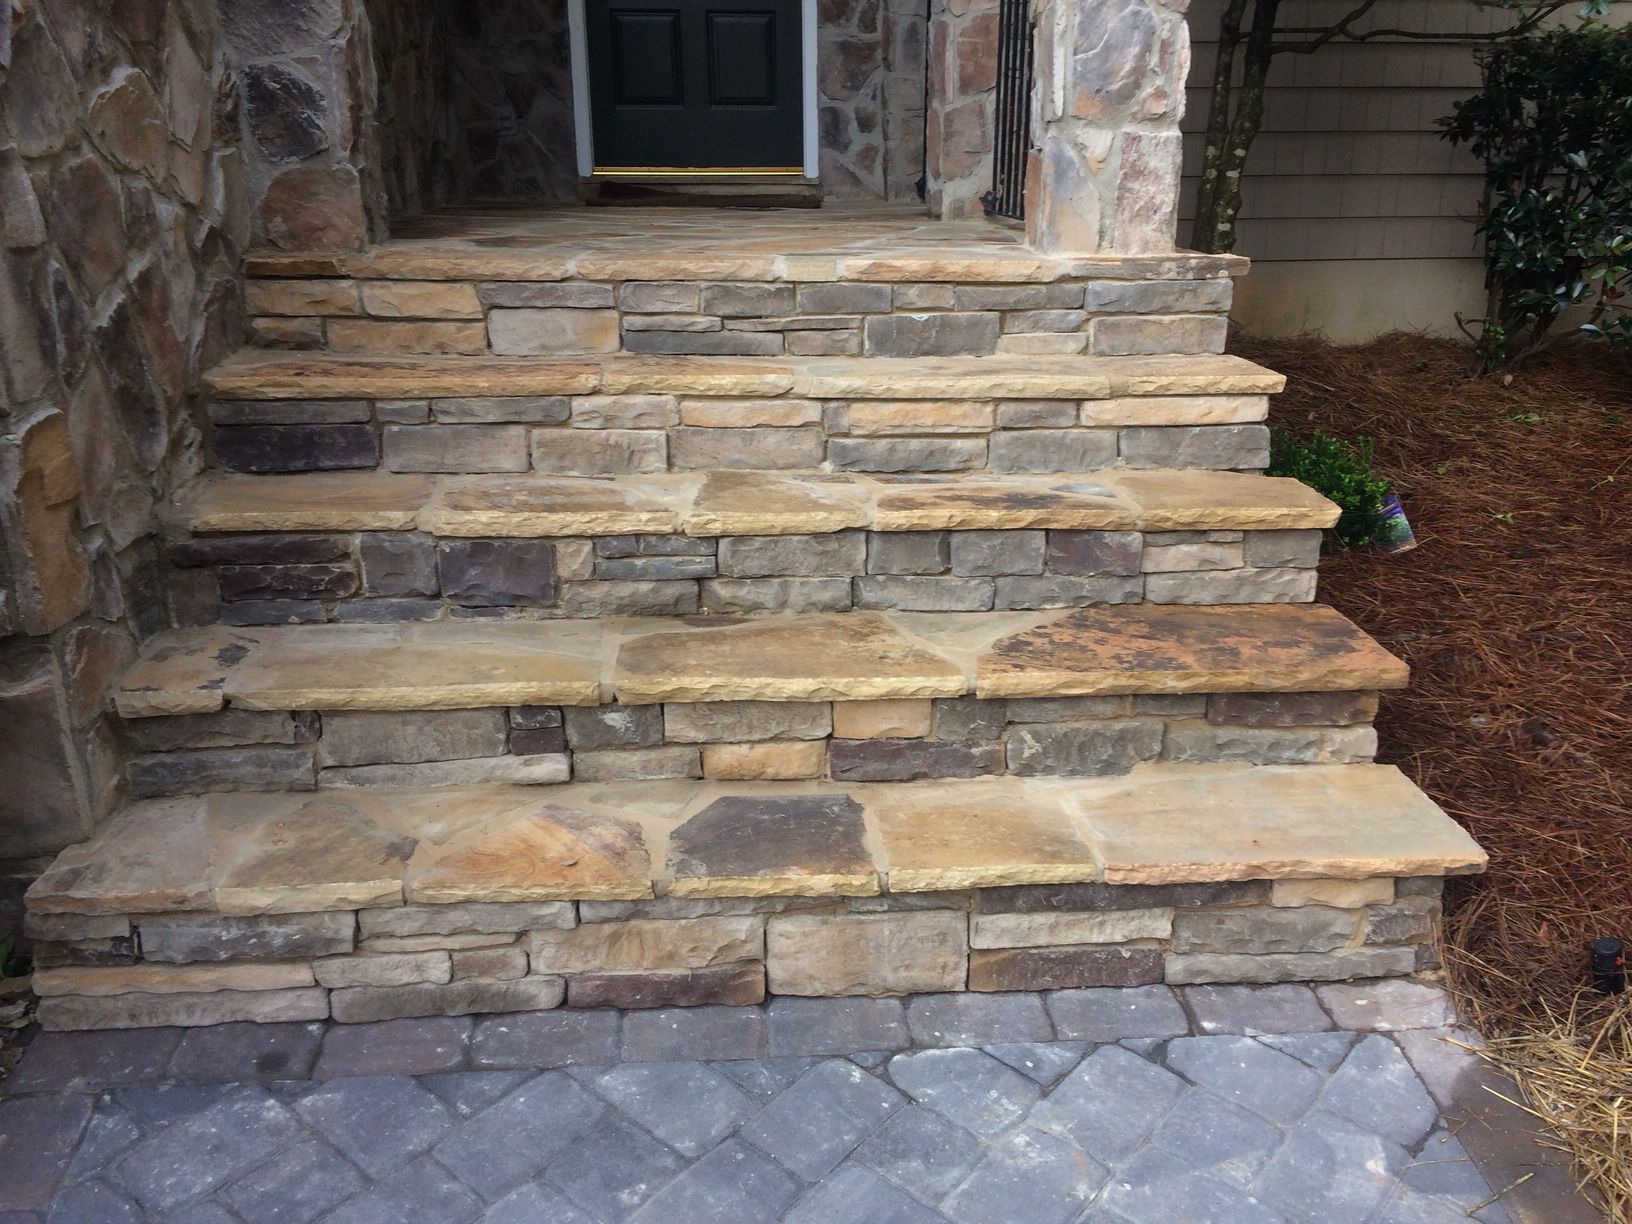 landscaping companies charlotte nc
